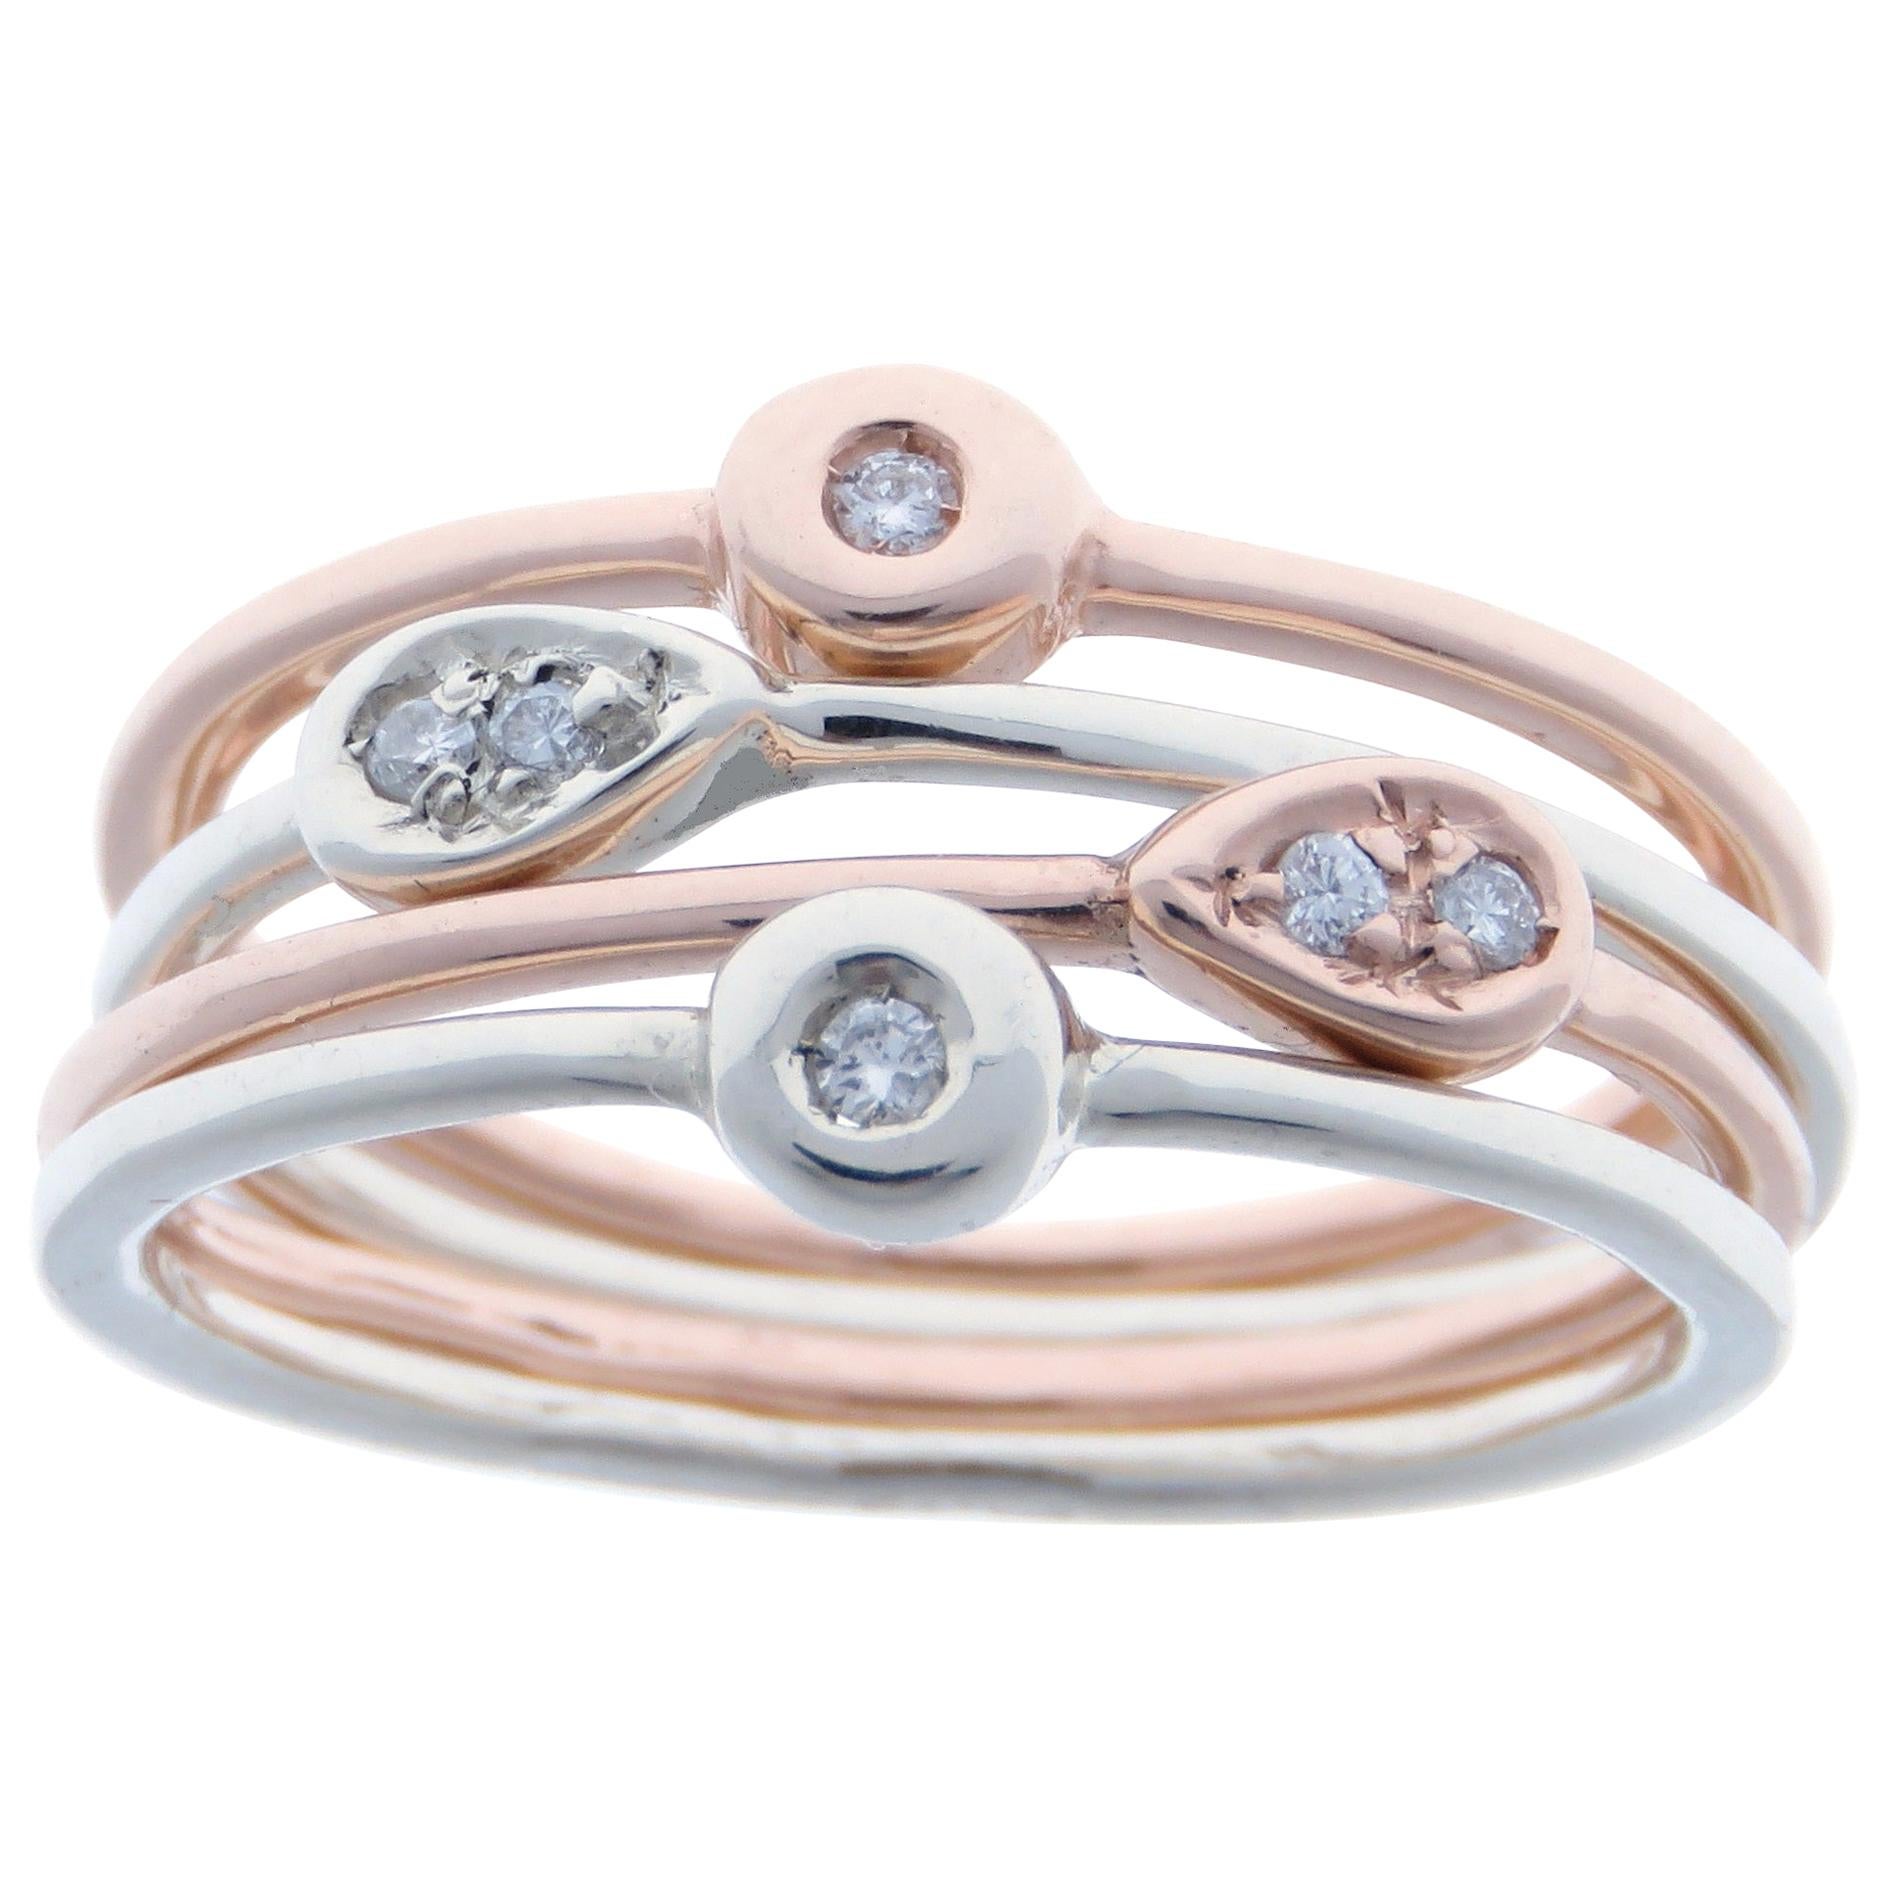 Diamonds White Rose Gold Stacking Ring Handcrafted in Italy by Botta Gioielli